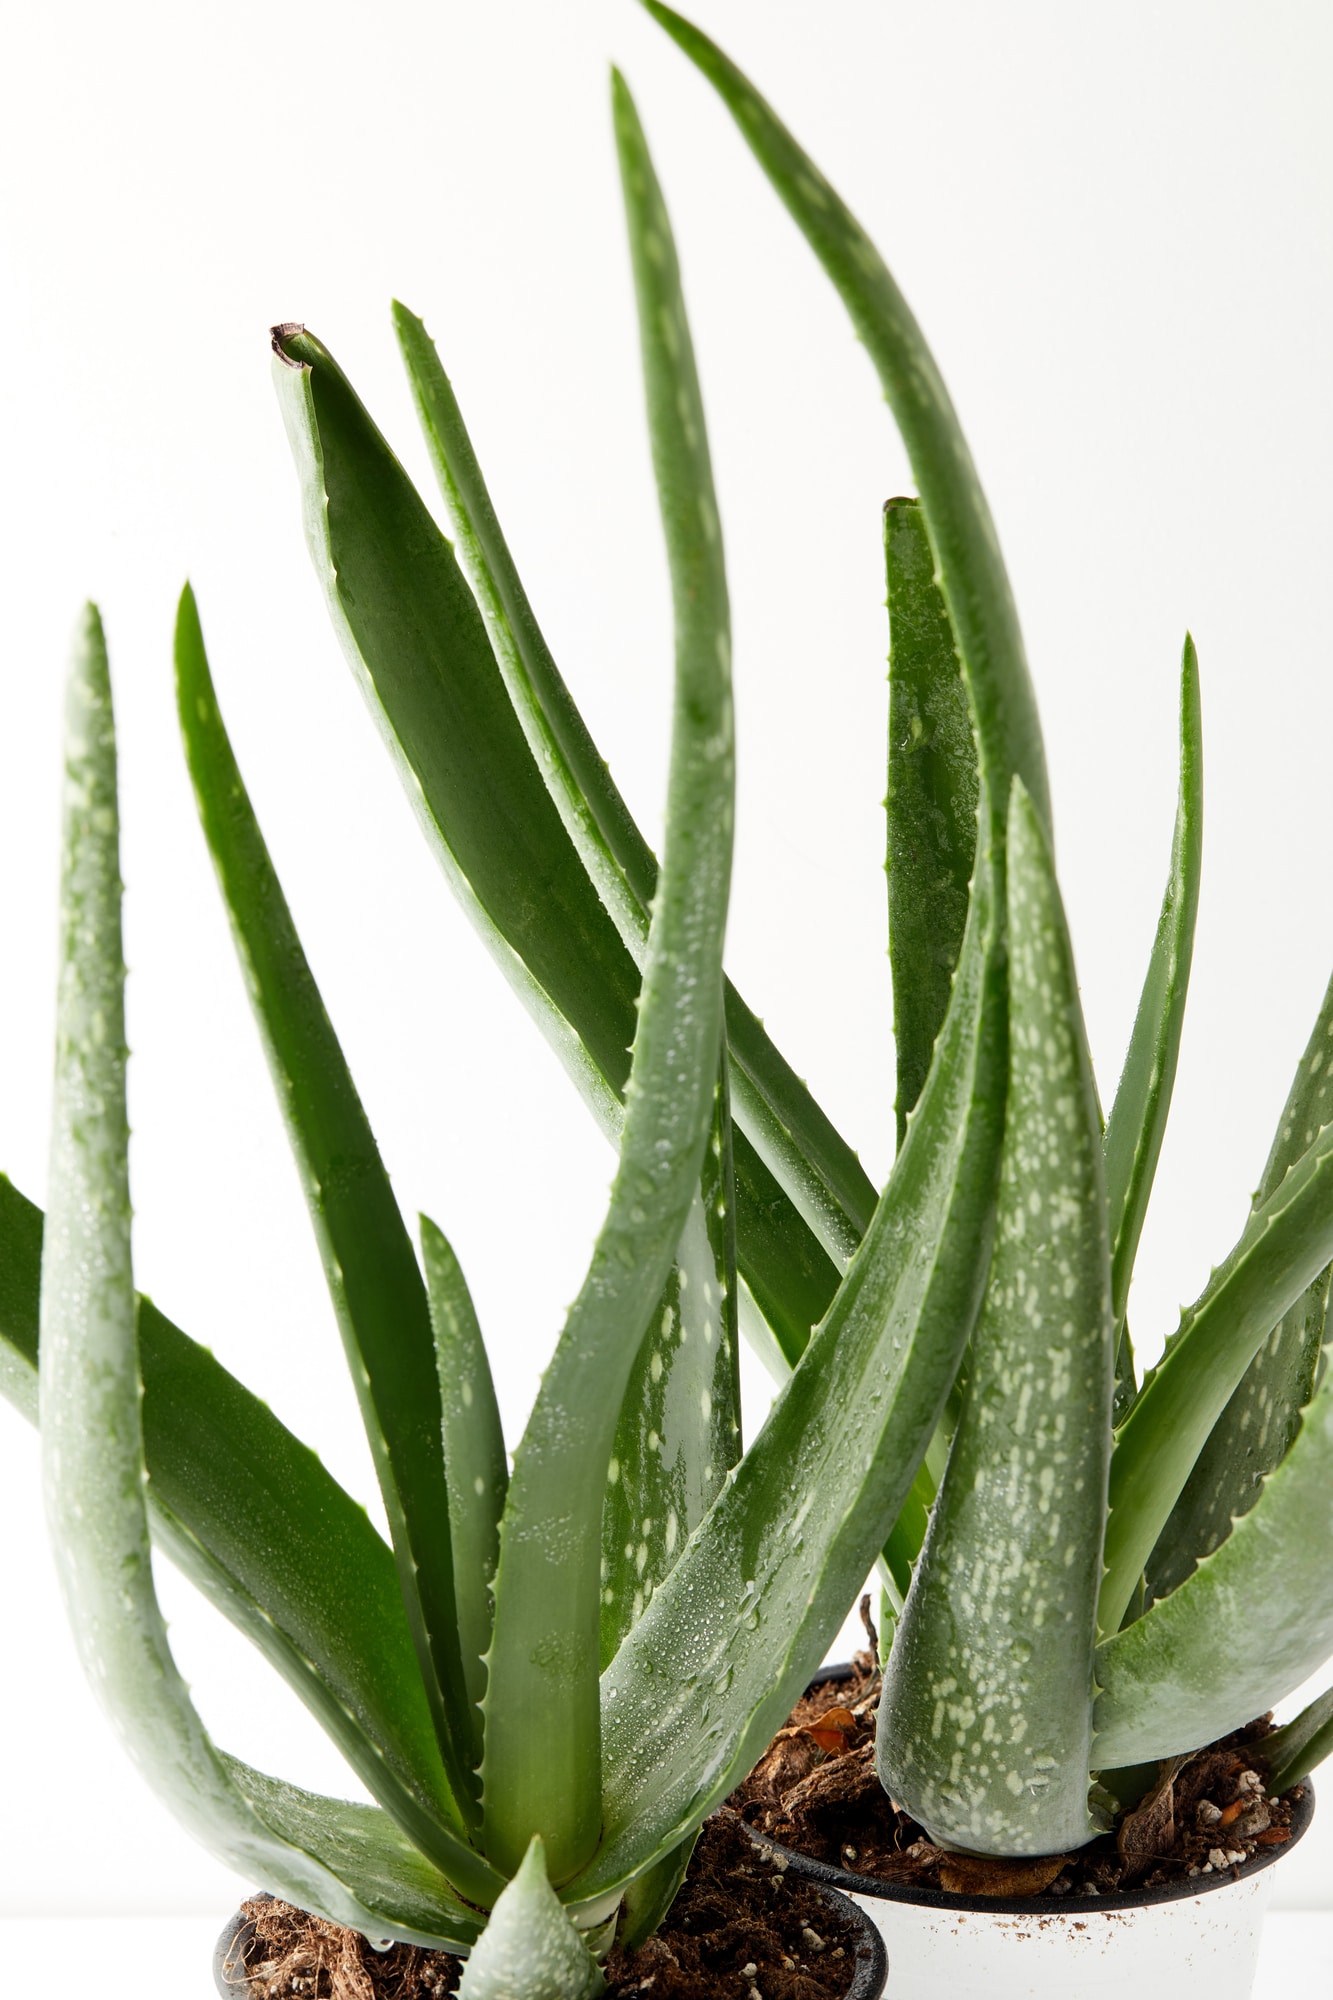 Aloe Vera Plant Care: Learn to Grow This Healing Succulent